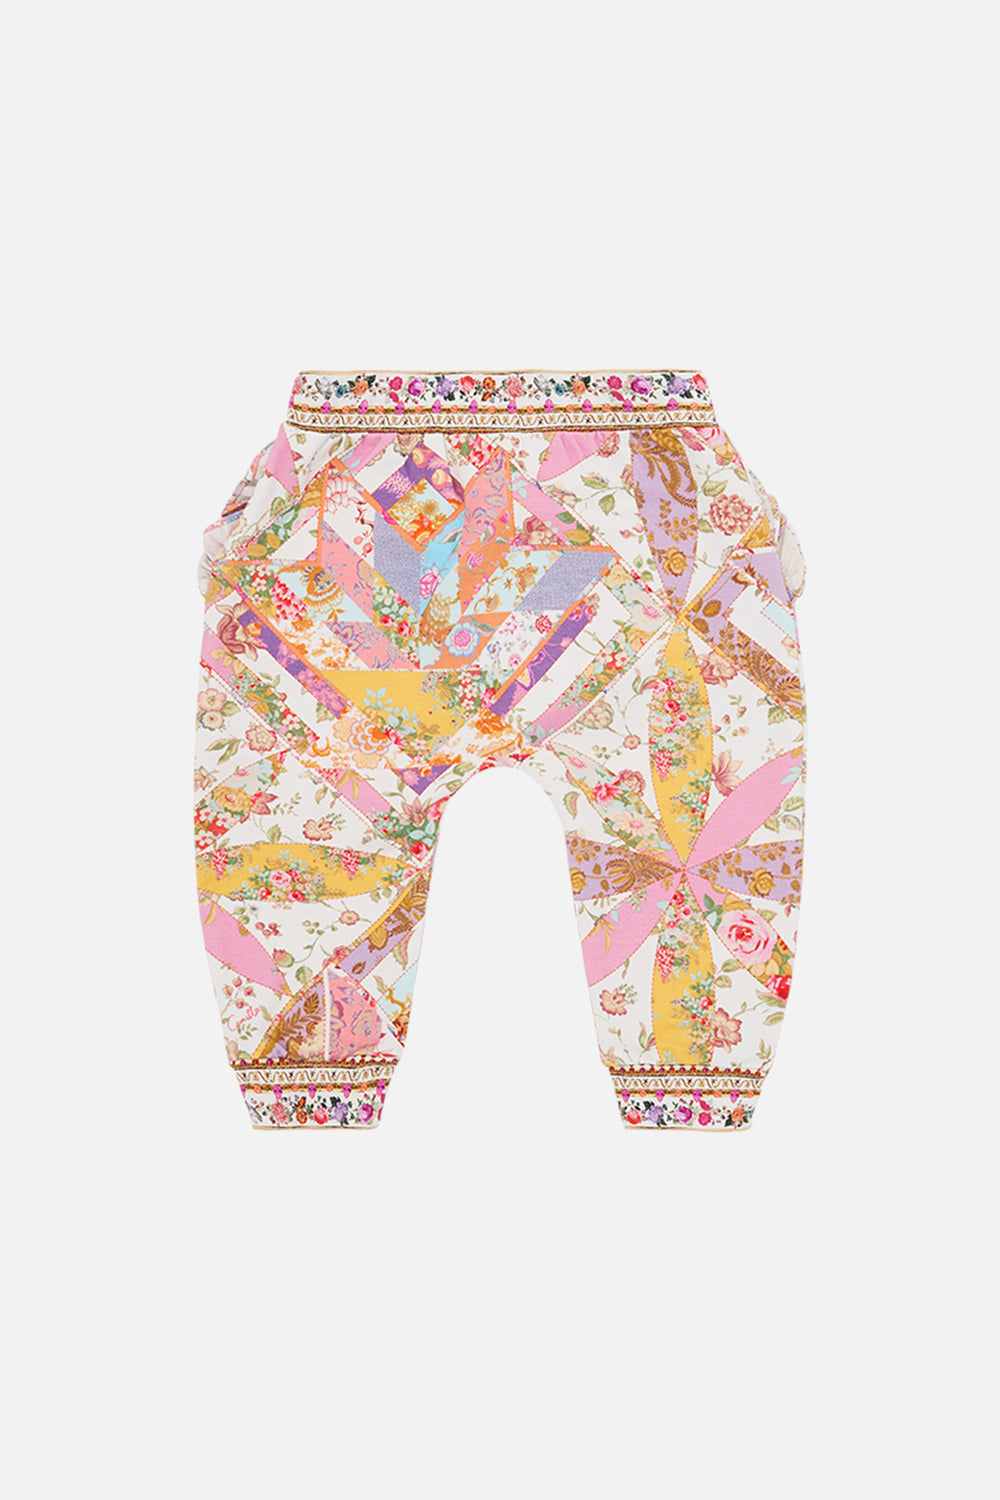 Milla by CAMILLA floral babies frill drop crotch pant in Sew Yesterday